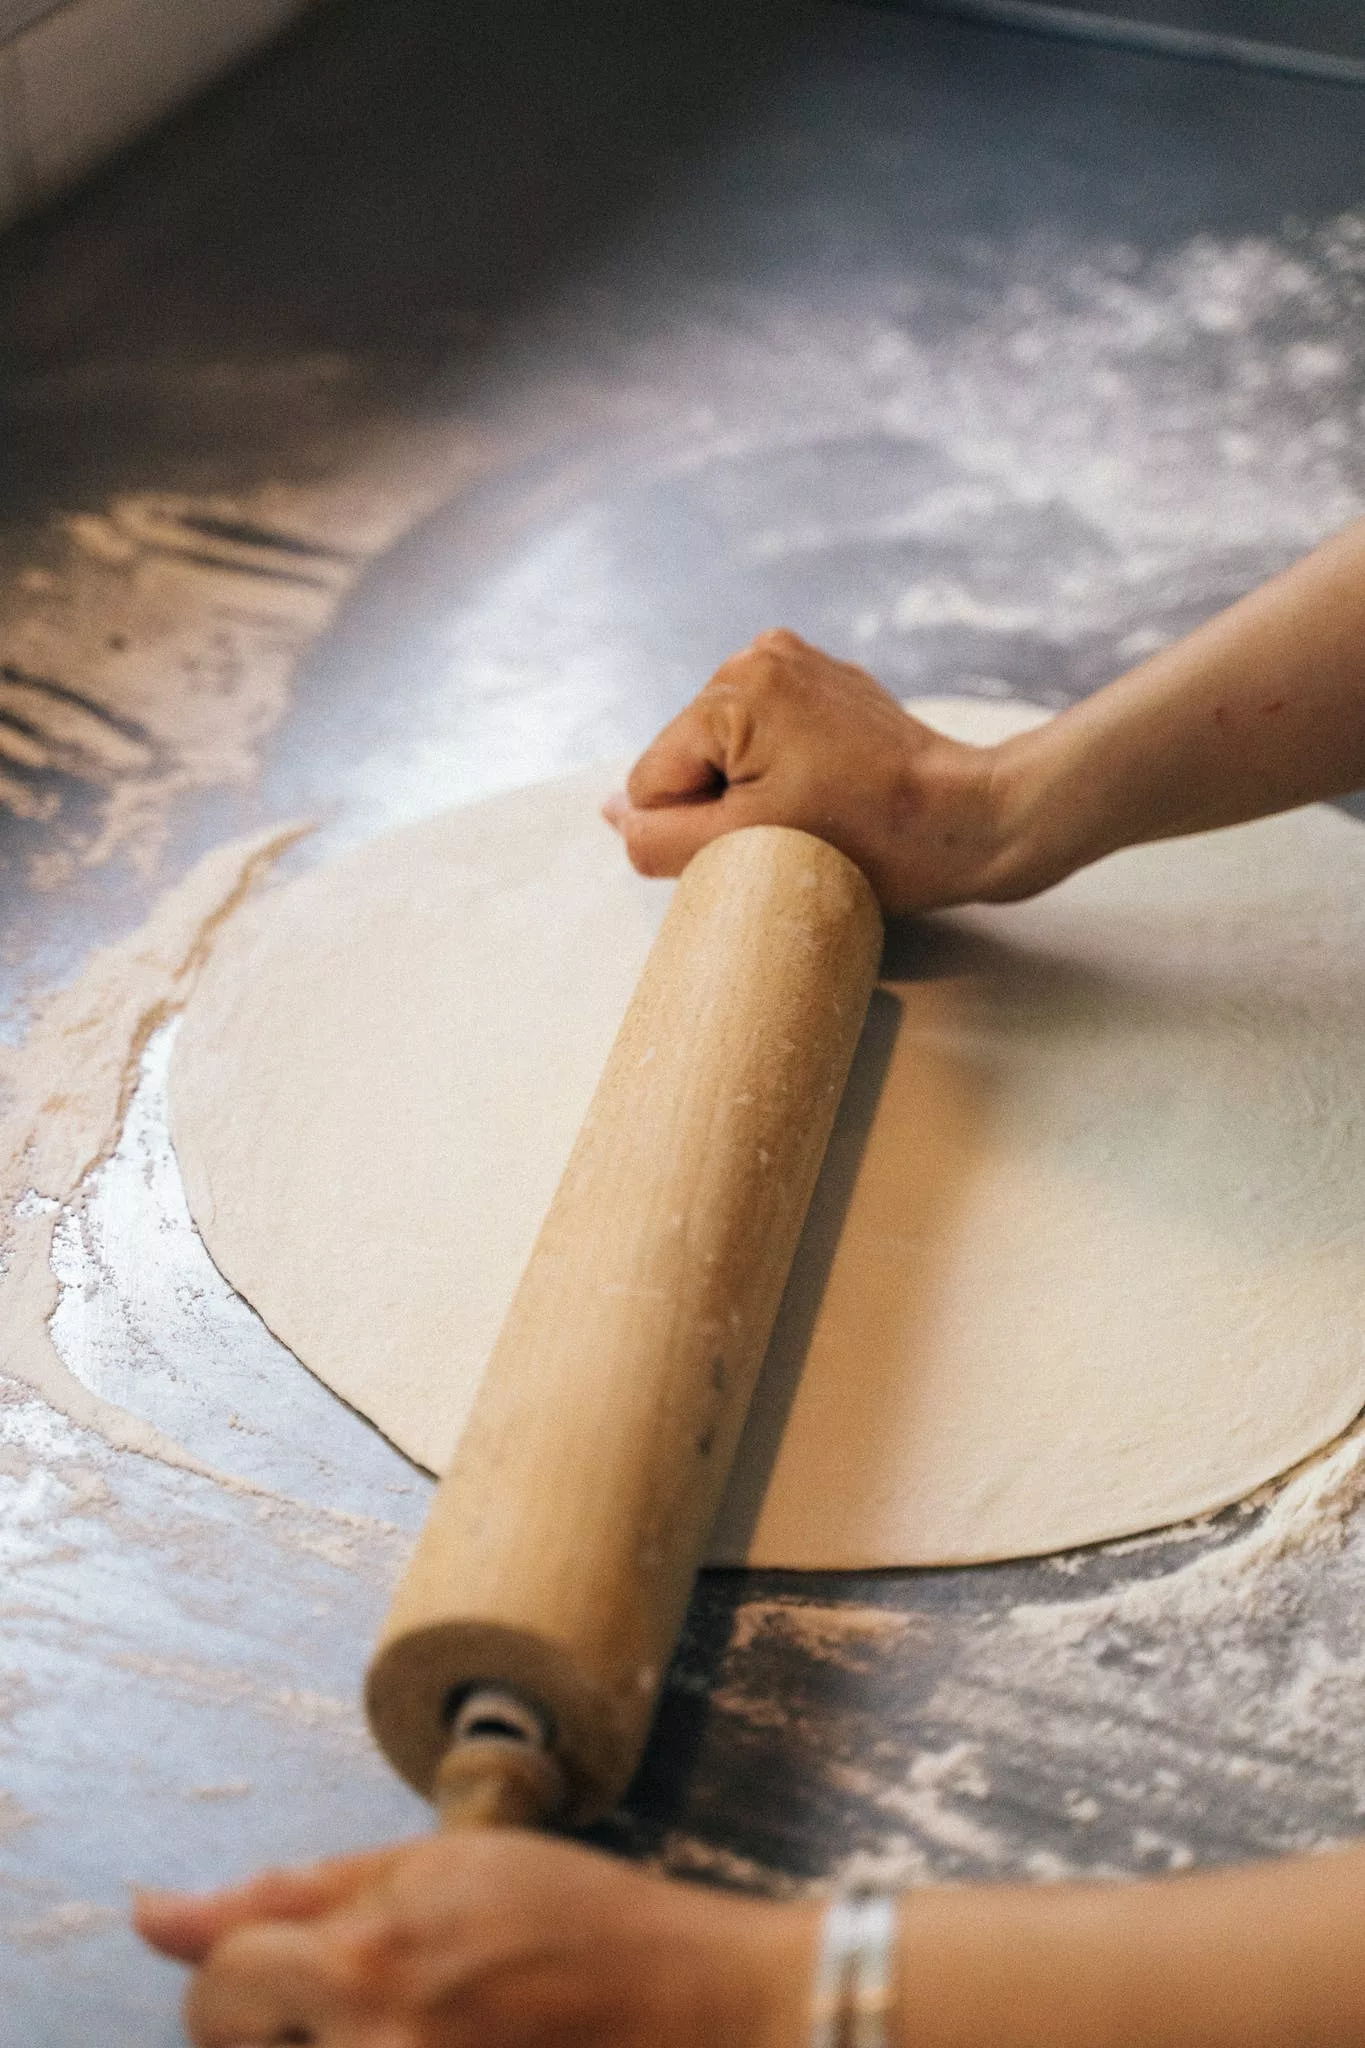 A Person Flattening the Pizza Dough Using a Rolling Pin